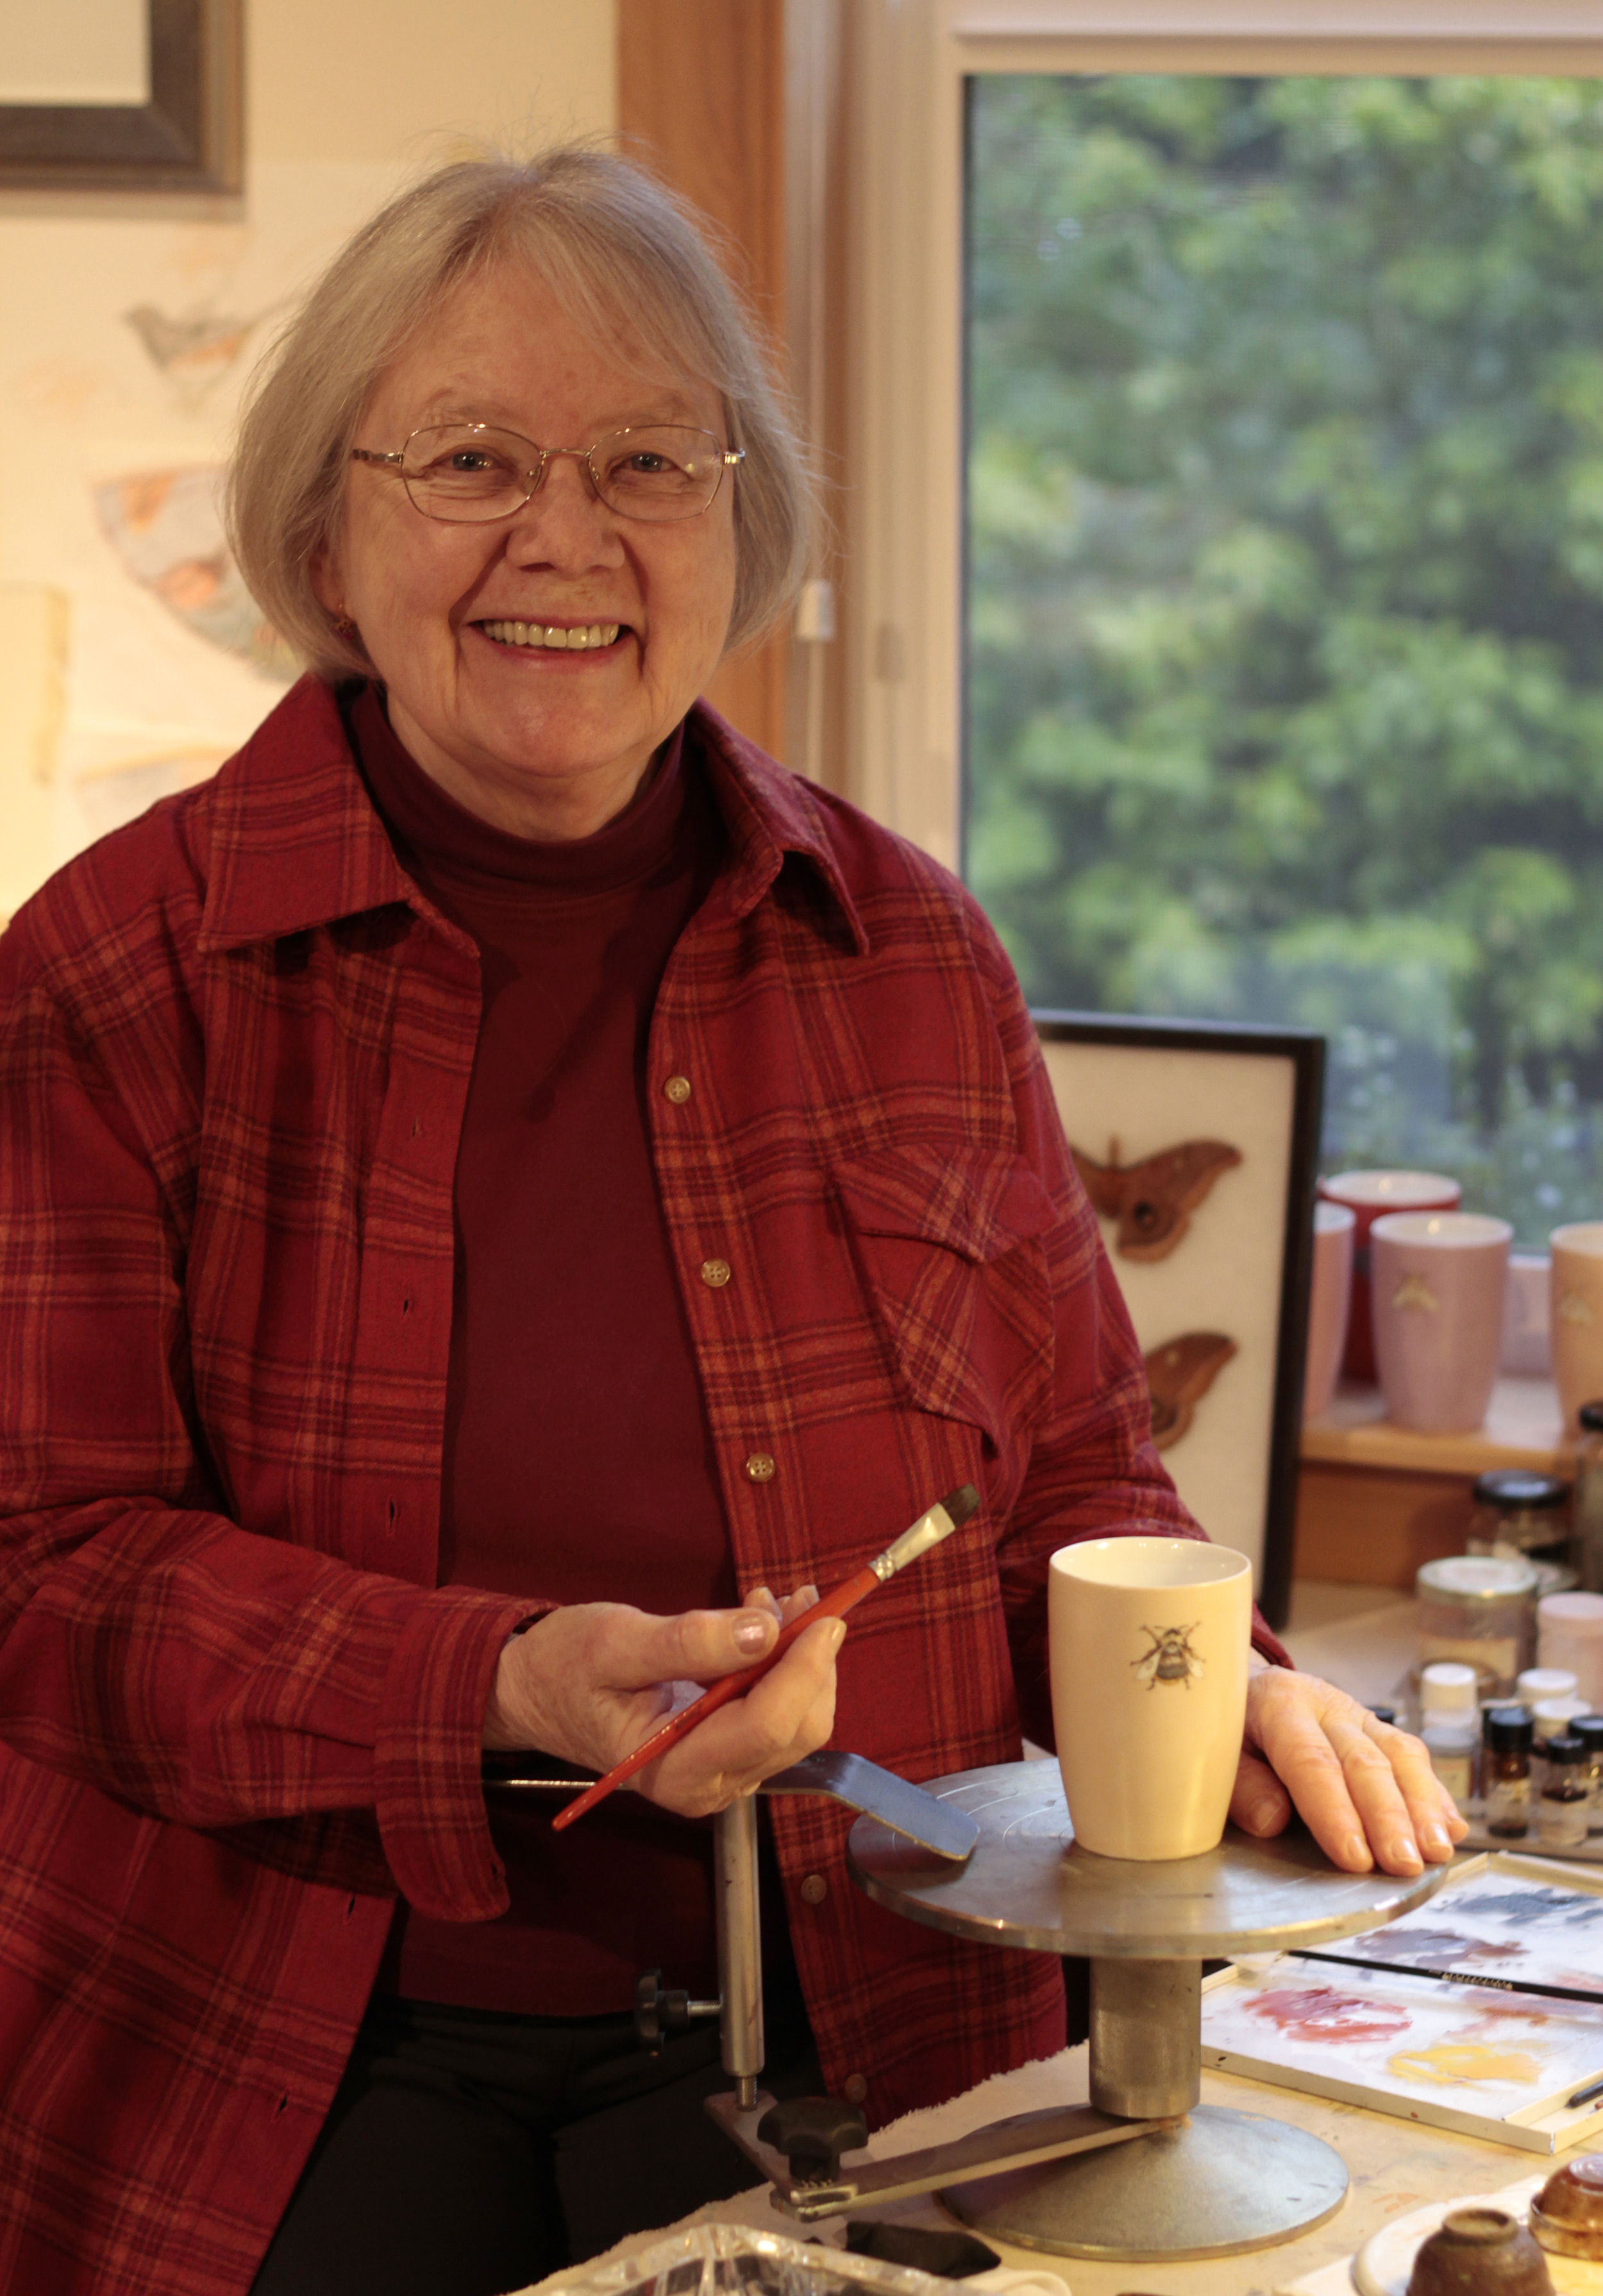  2016 Island Treasure Award recipient Cameron Snow in her home studio. Snow is most renowned for her work in the medium of film, through which she has immortalized many aspects of Bainbridge Island’s unique culture, heritage and environment. 